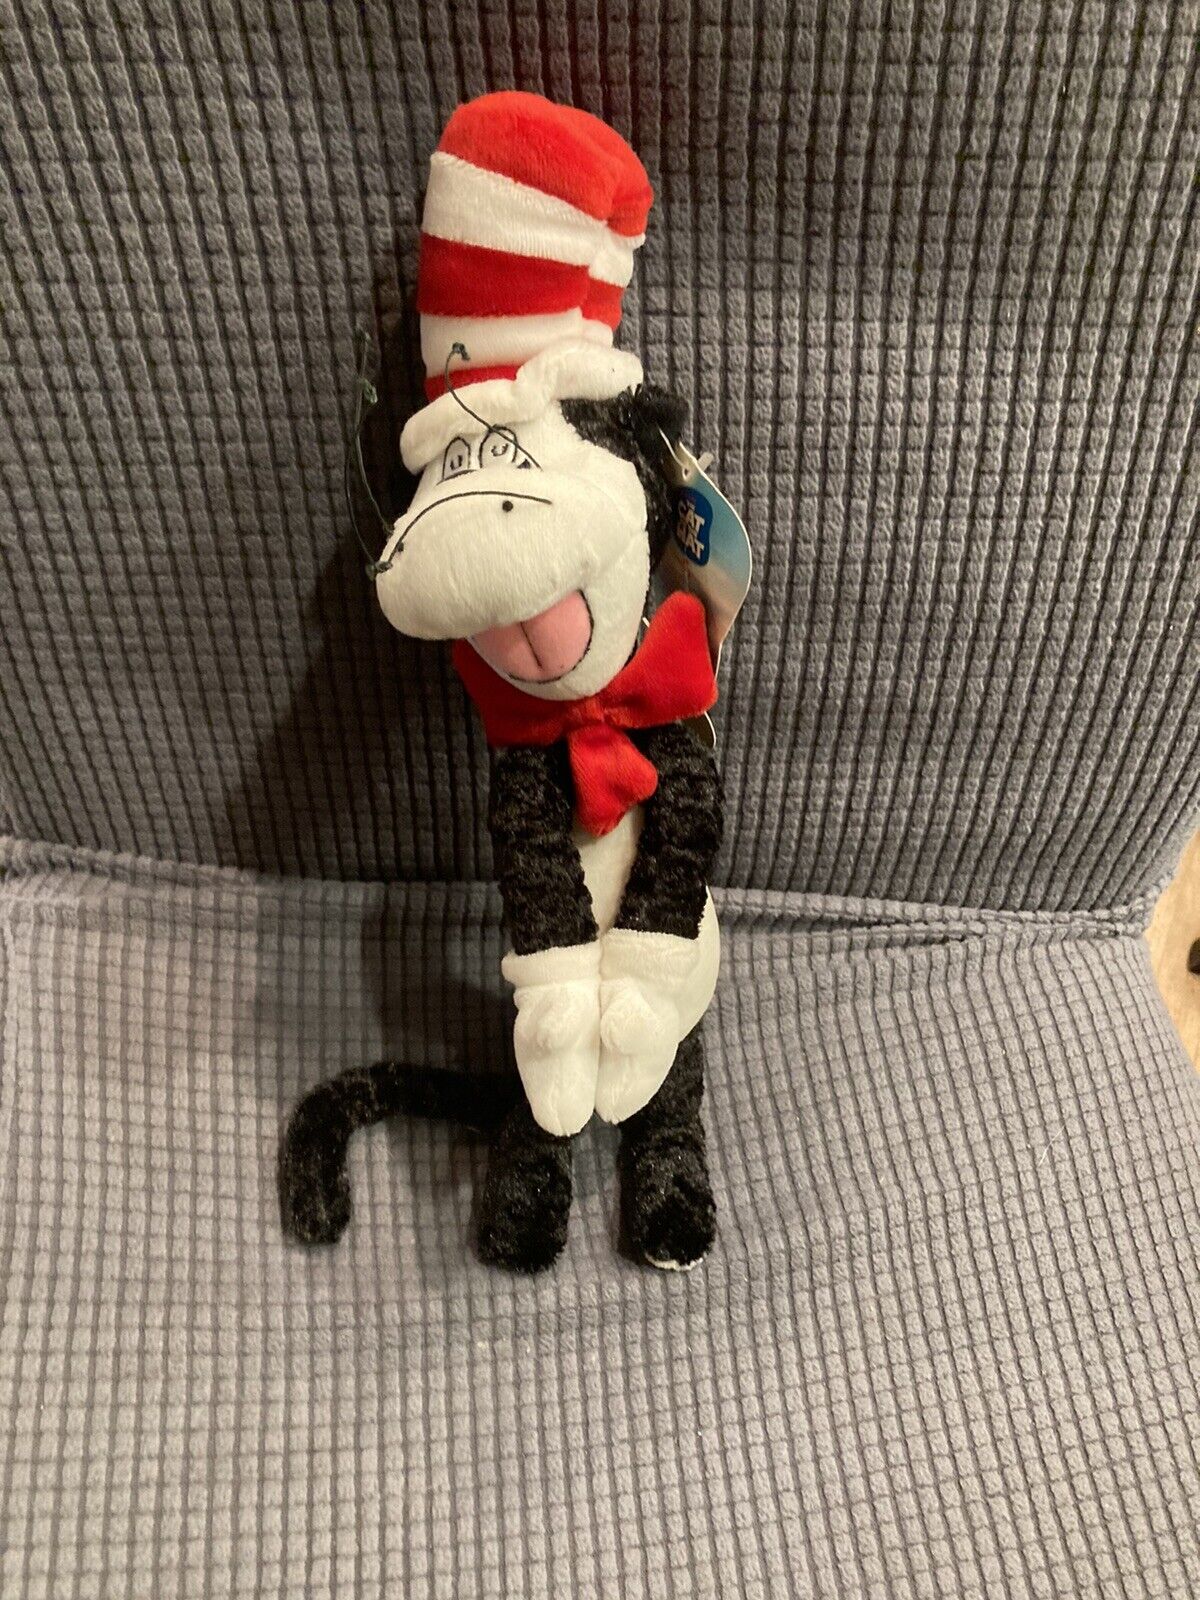 CAT IN THE HAT PLUSH STUFFED AnimalTOY- OFFICIAL MOVIE MERCHANDISE  11” NWT 2003